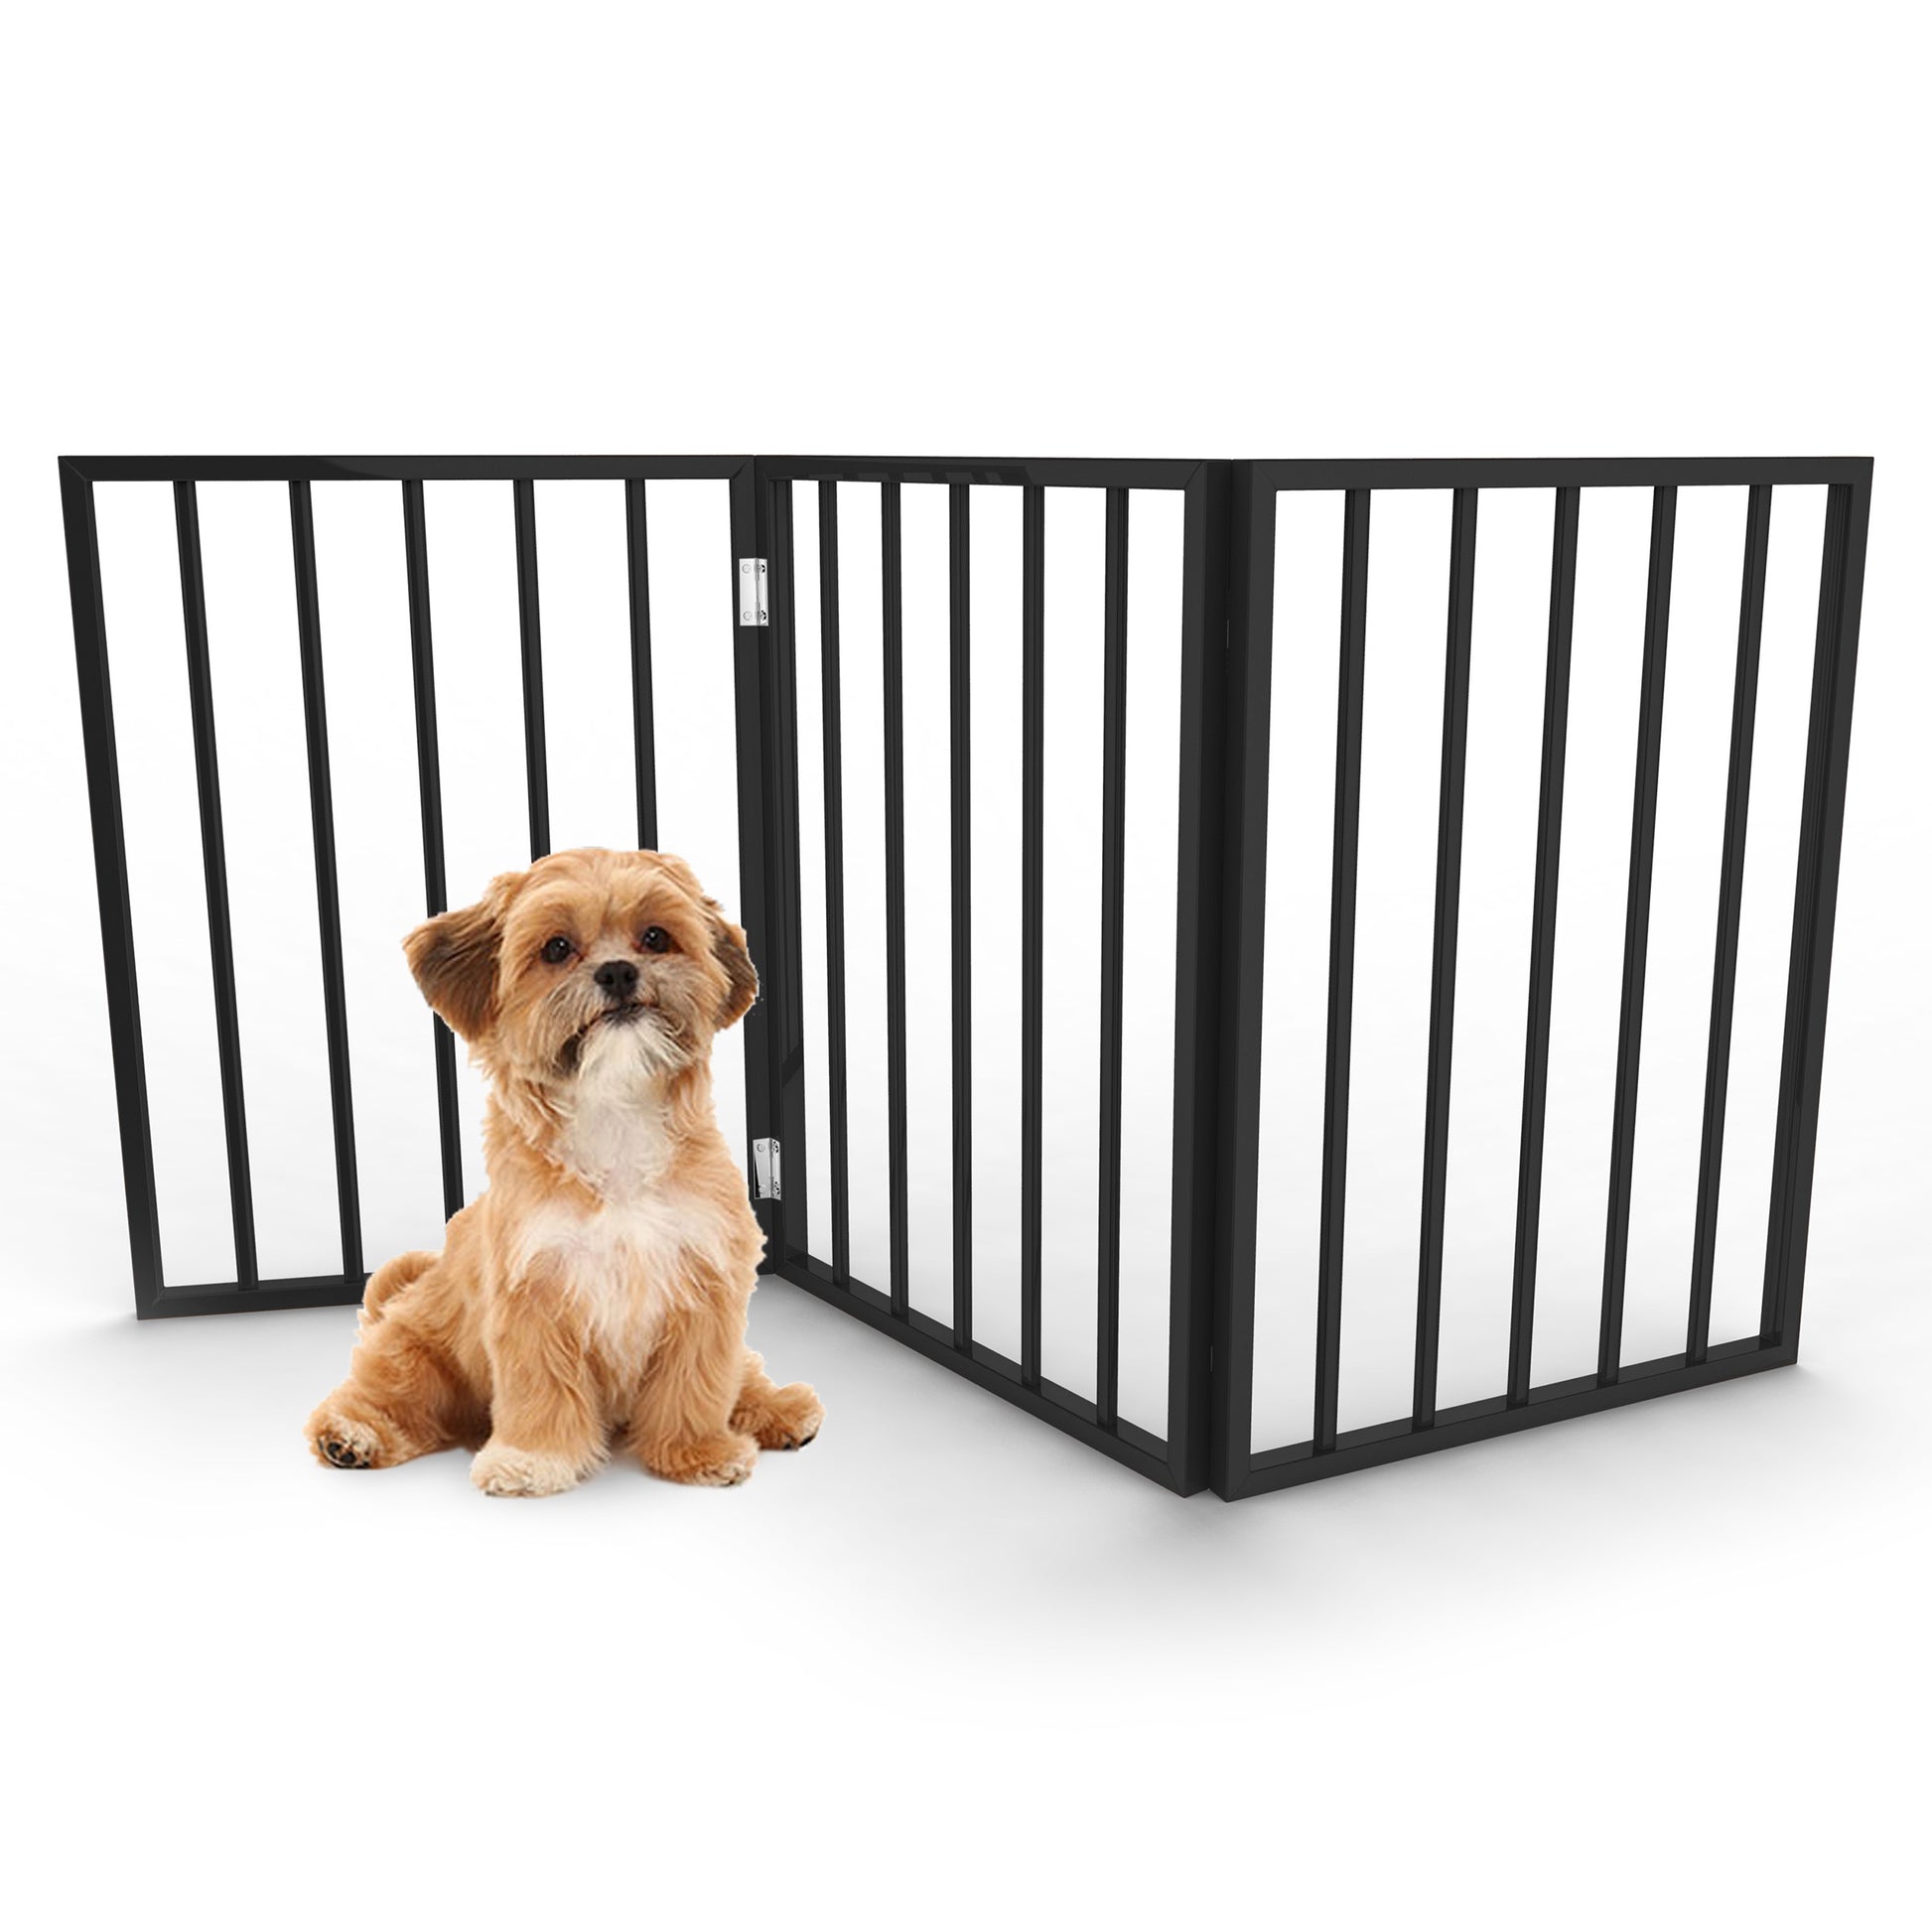 Puppy dog sits obediently in front of 3-panel dog gate